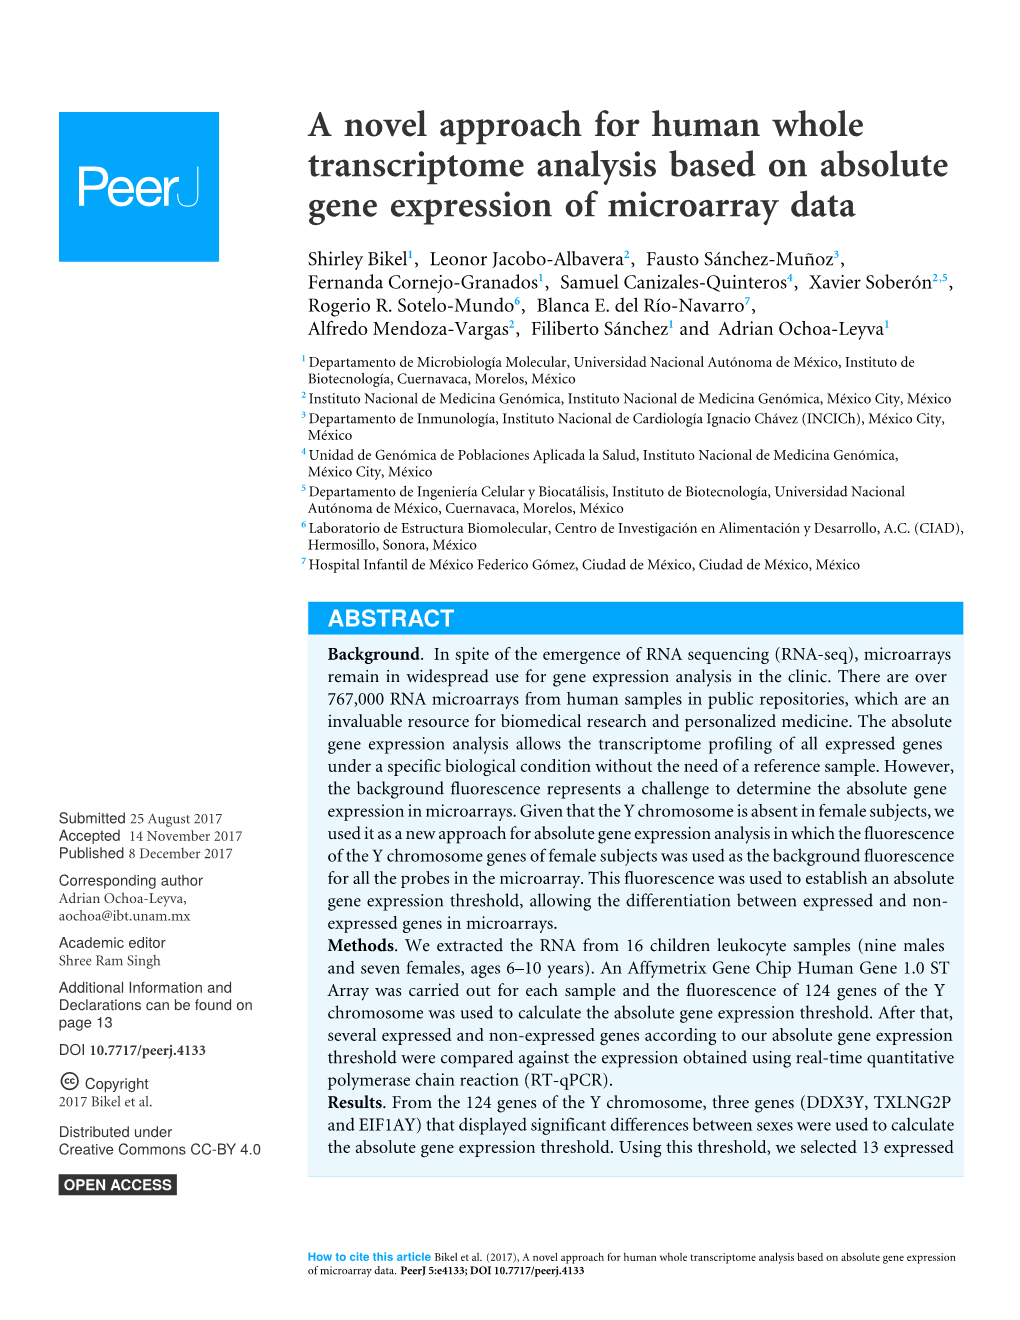 A Novel Approach for Human Whole Transcriptome Analysis Based on Absolute Gene Expression of Microarray Data